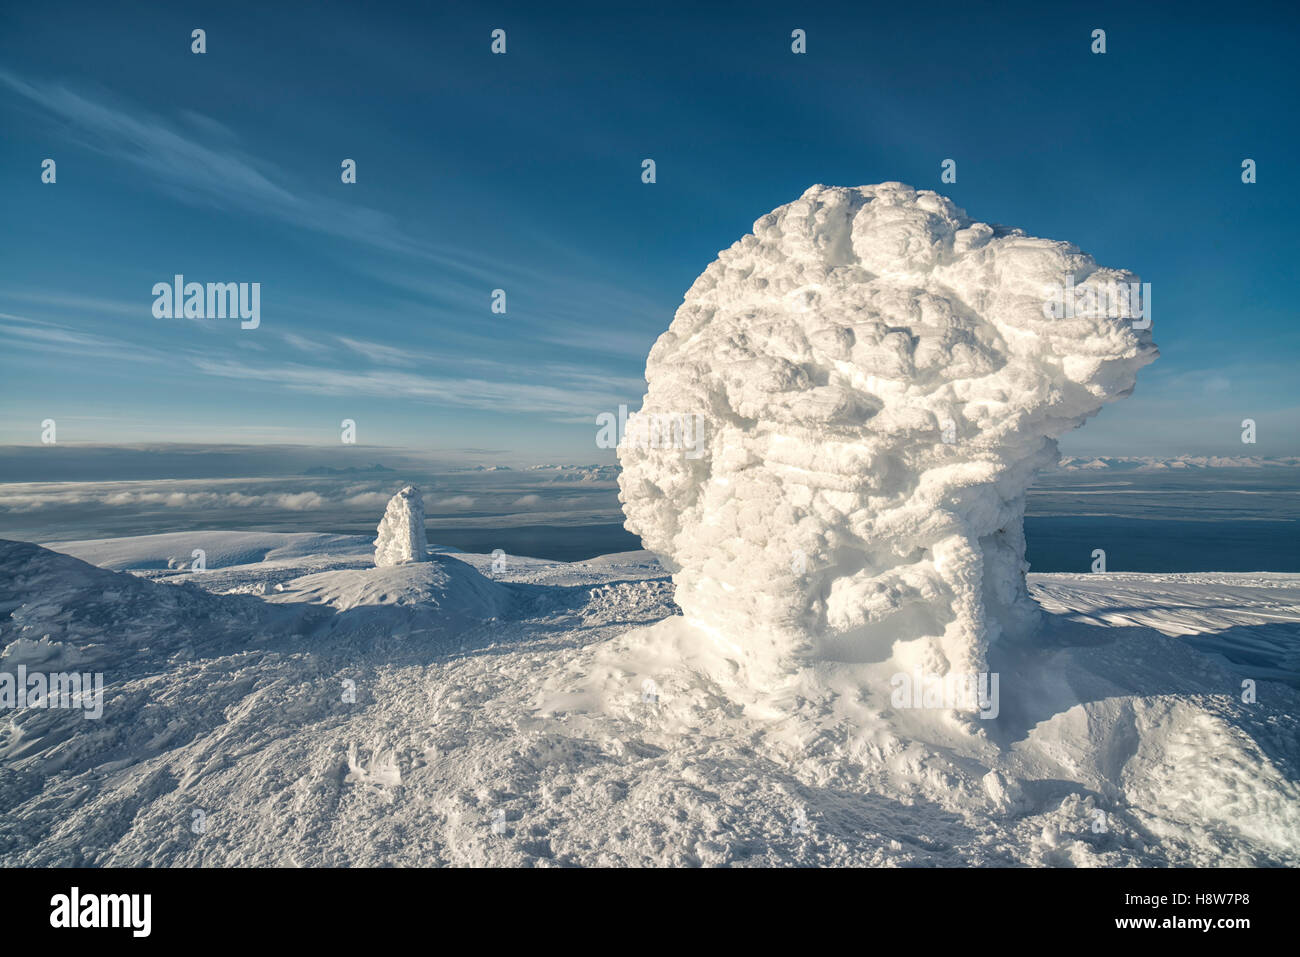 Panorama on top of Nordenskiölfjellet, snow and cold form interesting structures.Winter scenery Longyearbyen, Spitsbergen Stock Photo